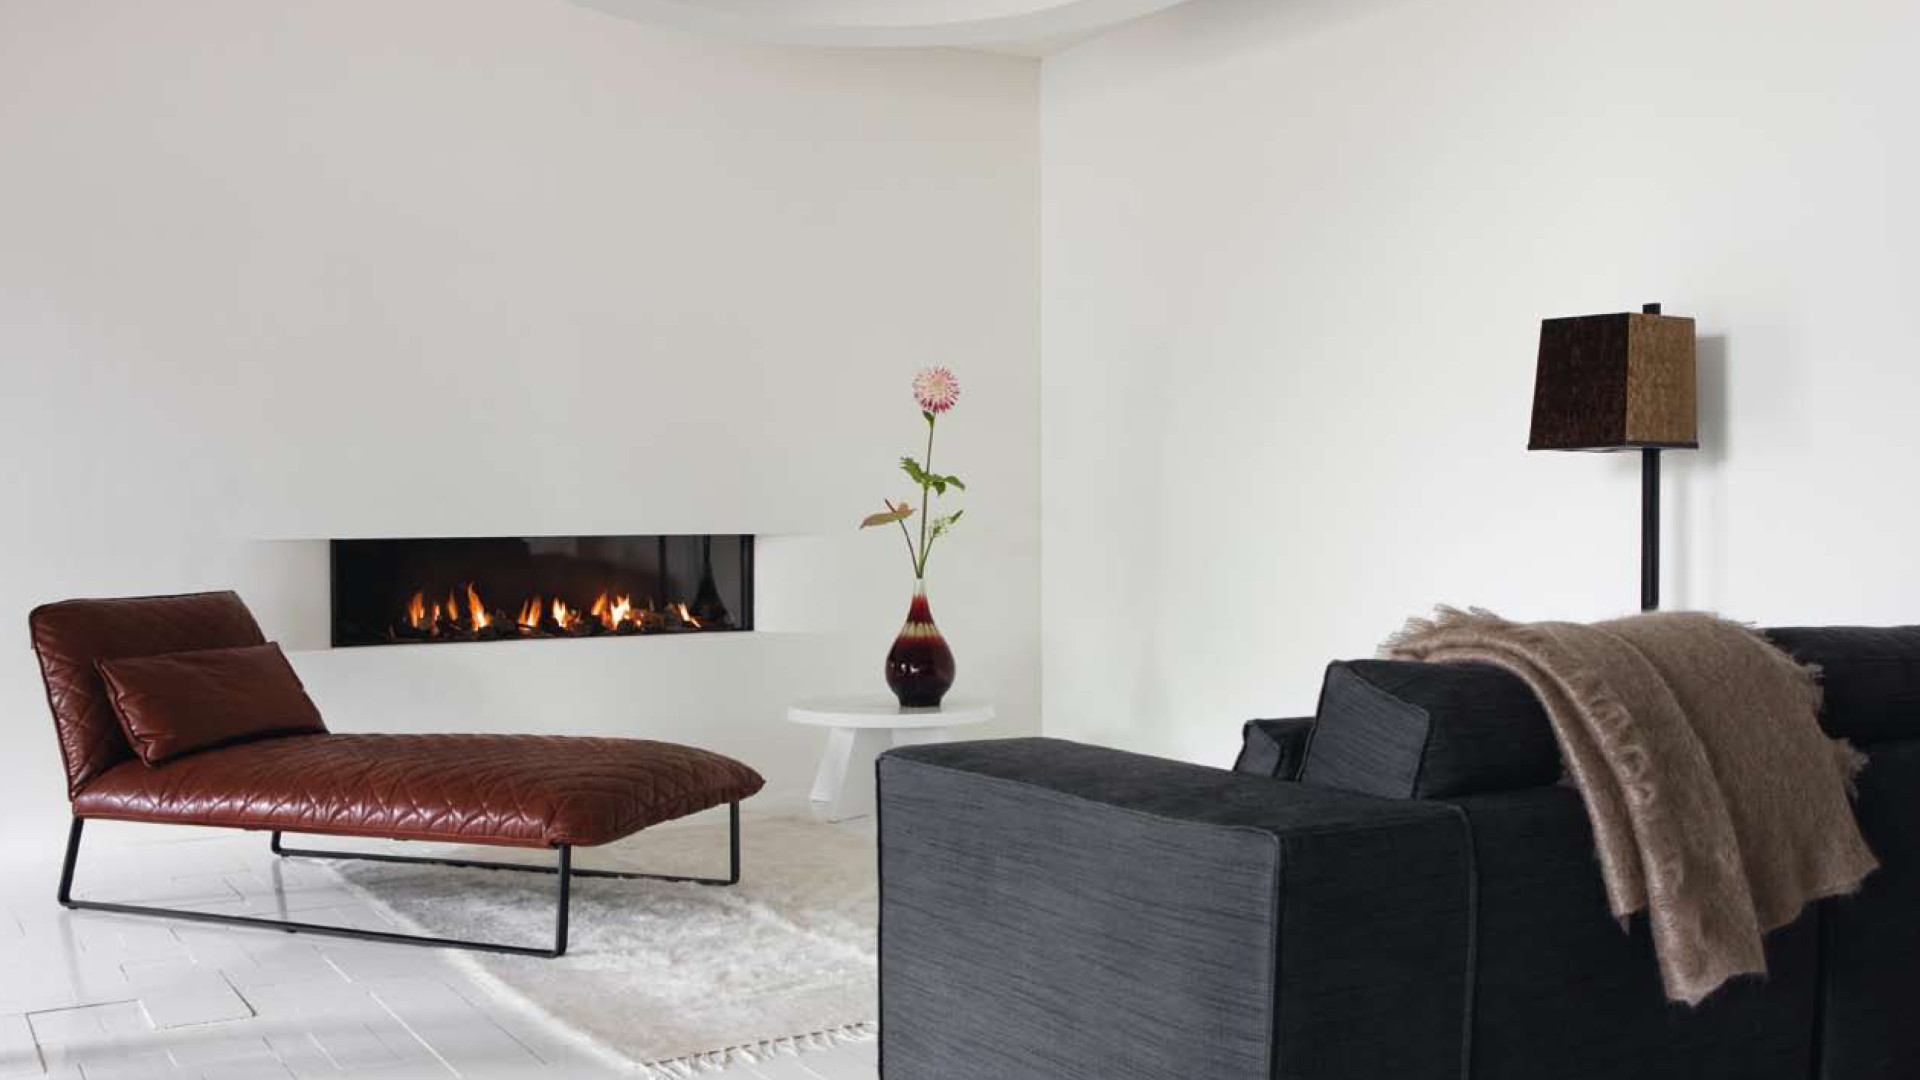 Types of Ethanol Contemporary Fireplaces